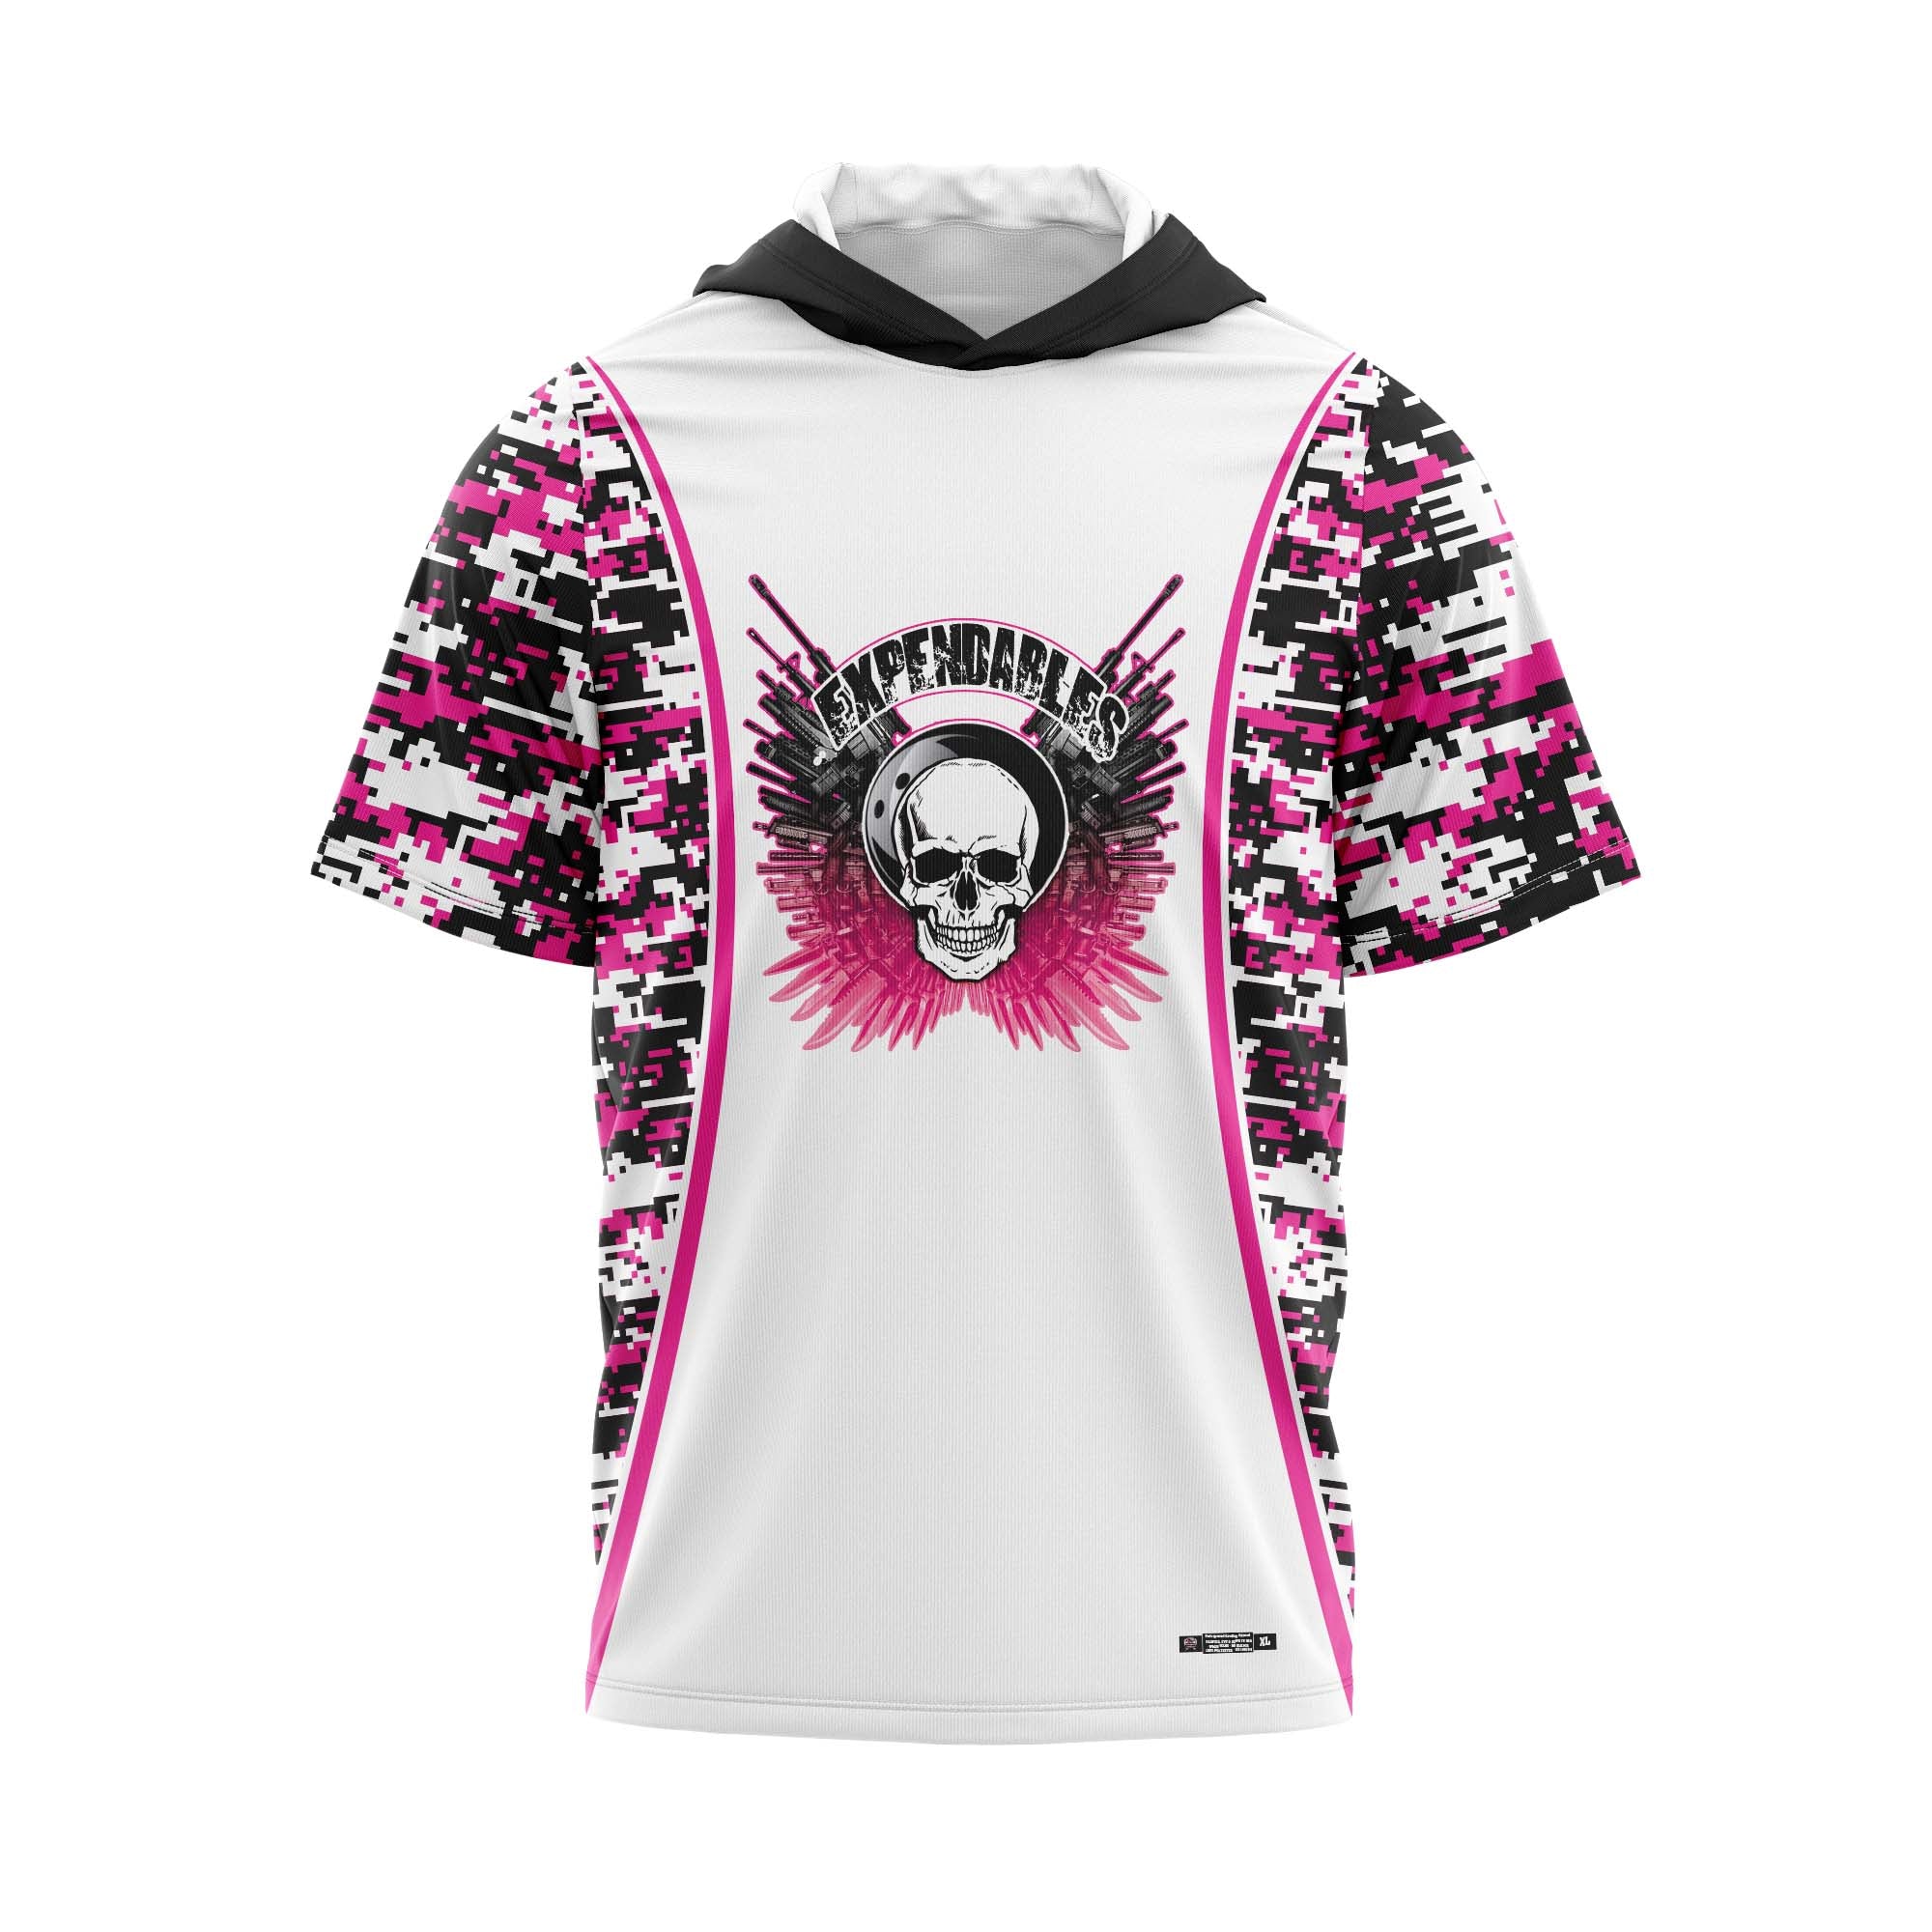 The Expendables Camo Pink Jersey